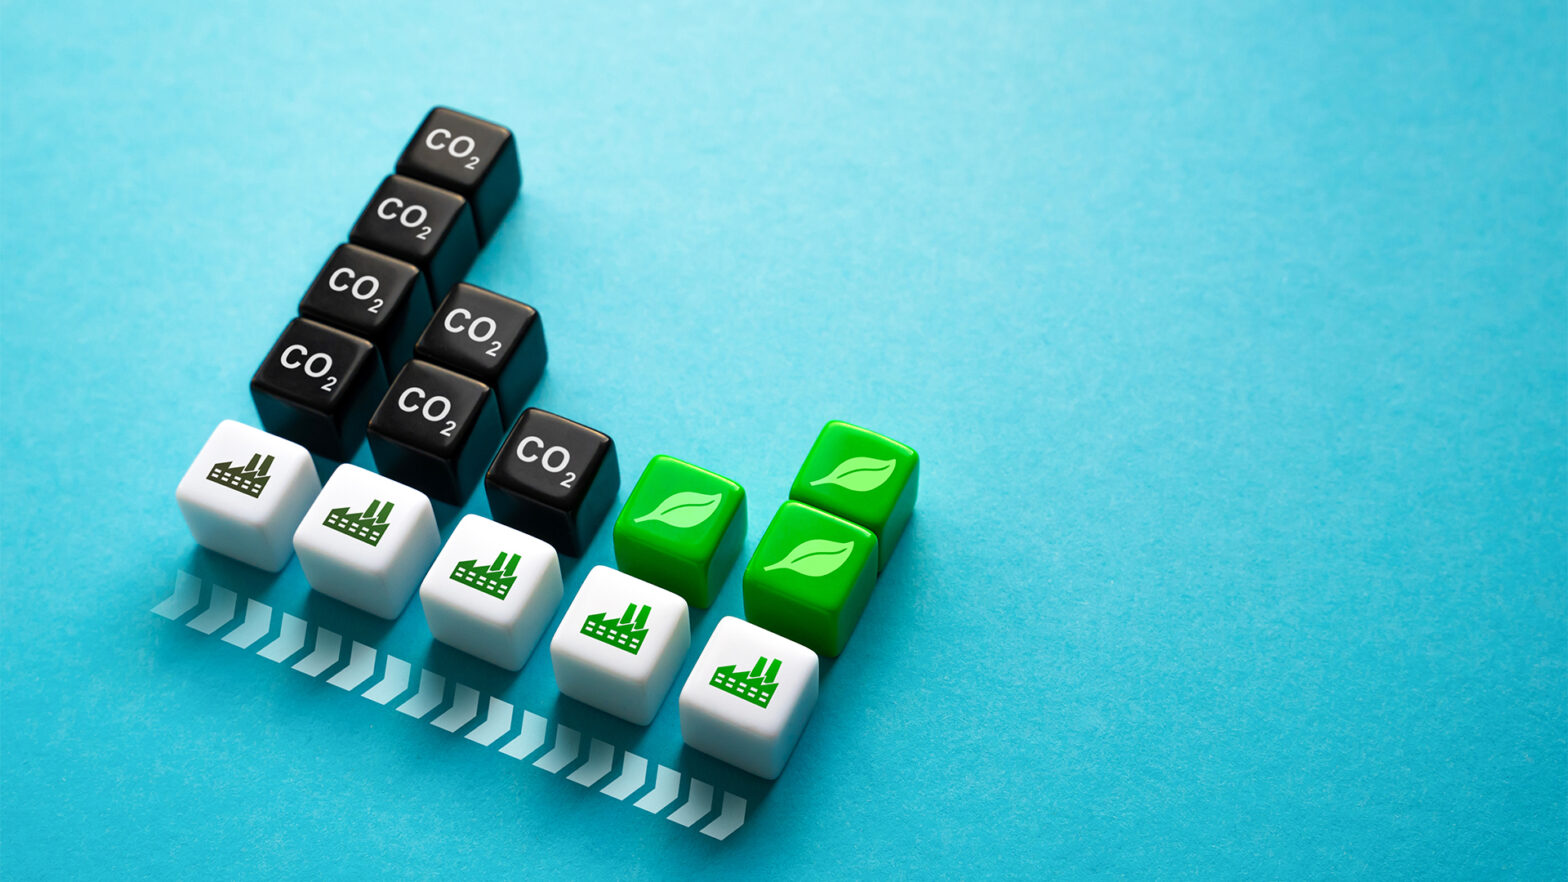 A set of dice showing the transition from a carbon-intensive to a sustainable energy system.